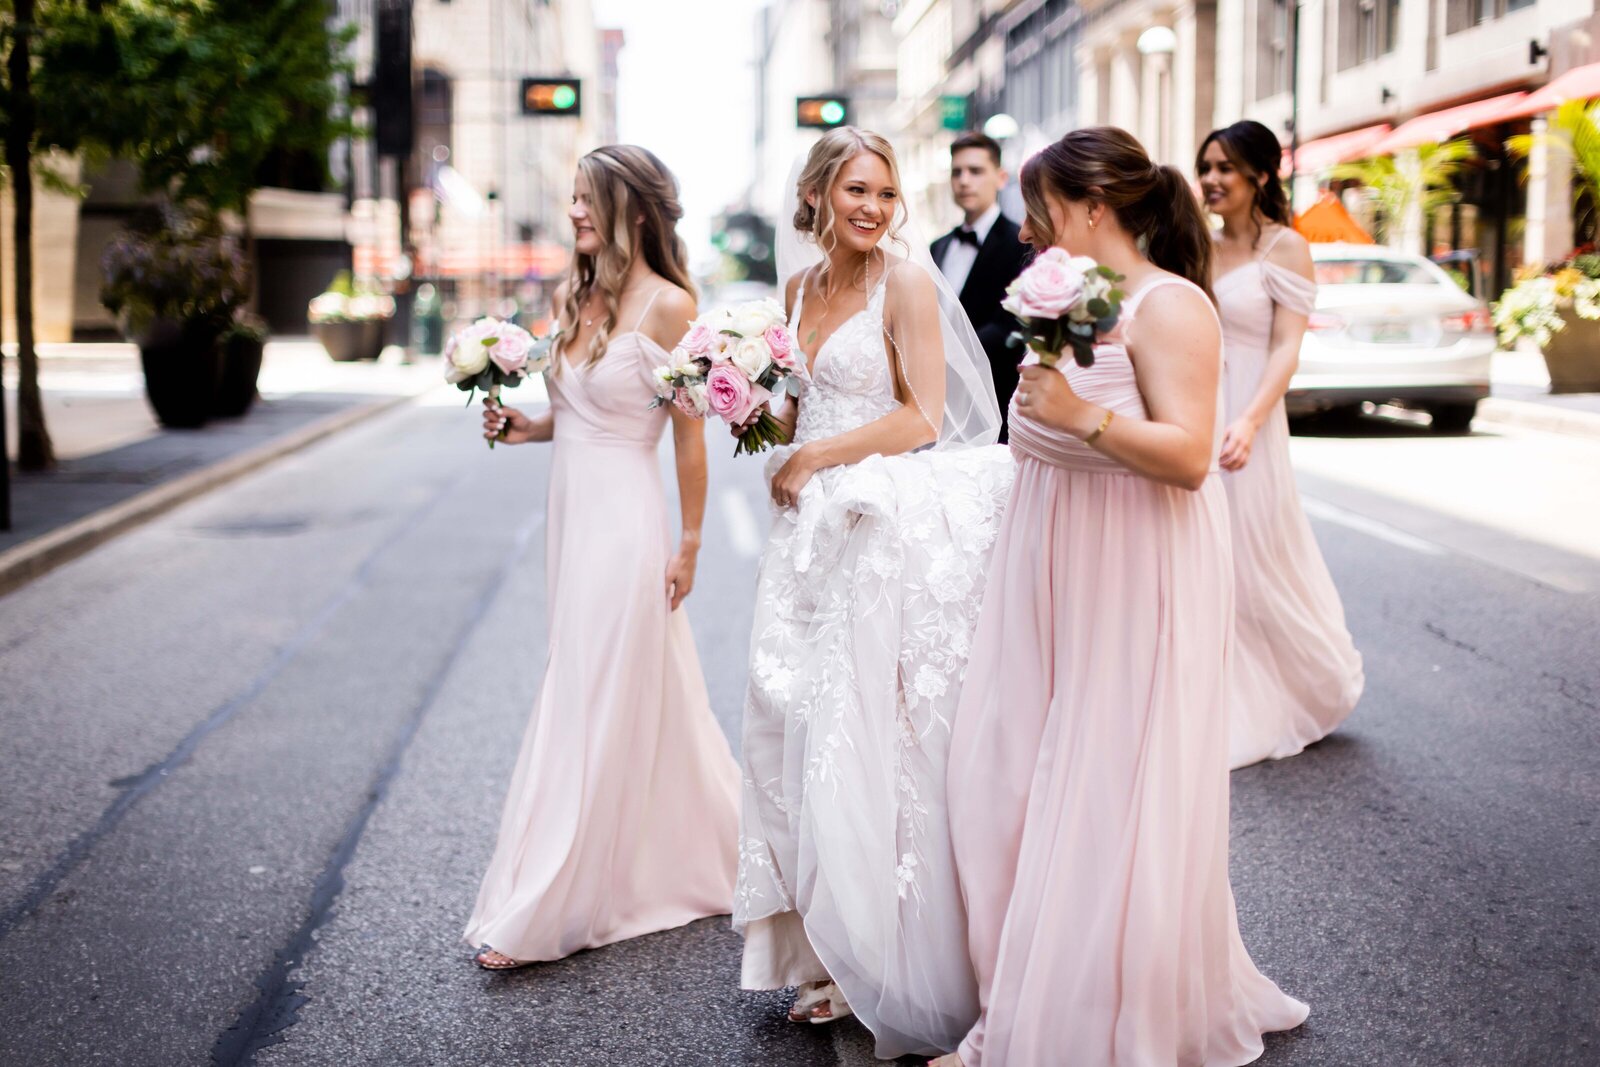 Capture the vibrant energy of Hailey and her bridesmaids as they cross the street in style, creating a lively and fashionable moment on her wedding day. This charming photograph showcases the group in motion, dressed in their elegant wedding attire, against the bustling urban backdrop. The image beautifully combines the excitement of the city with the joy of the wedding festivities, perfect for brides looking for dynamic and contemporary bridal party photo ideas.